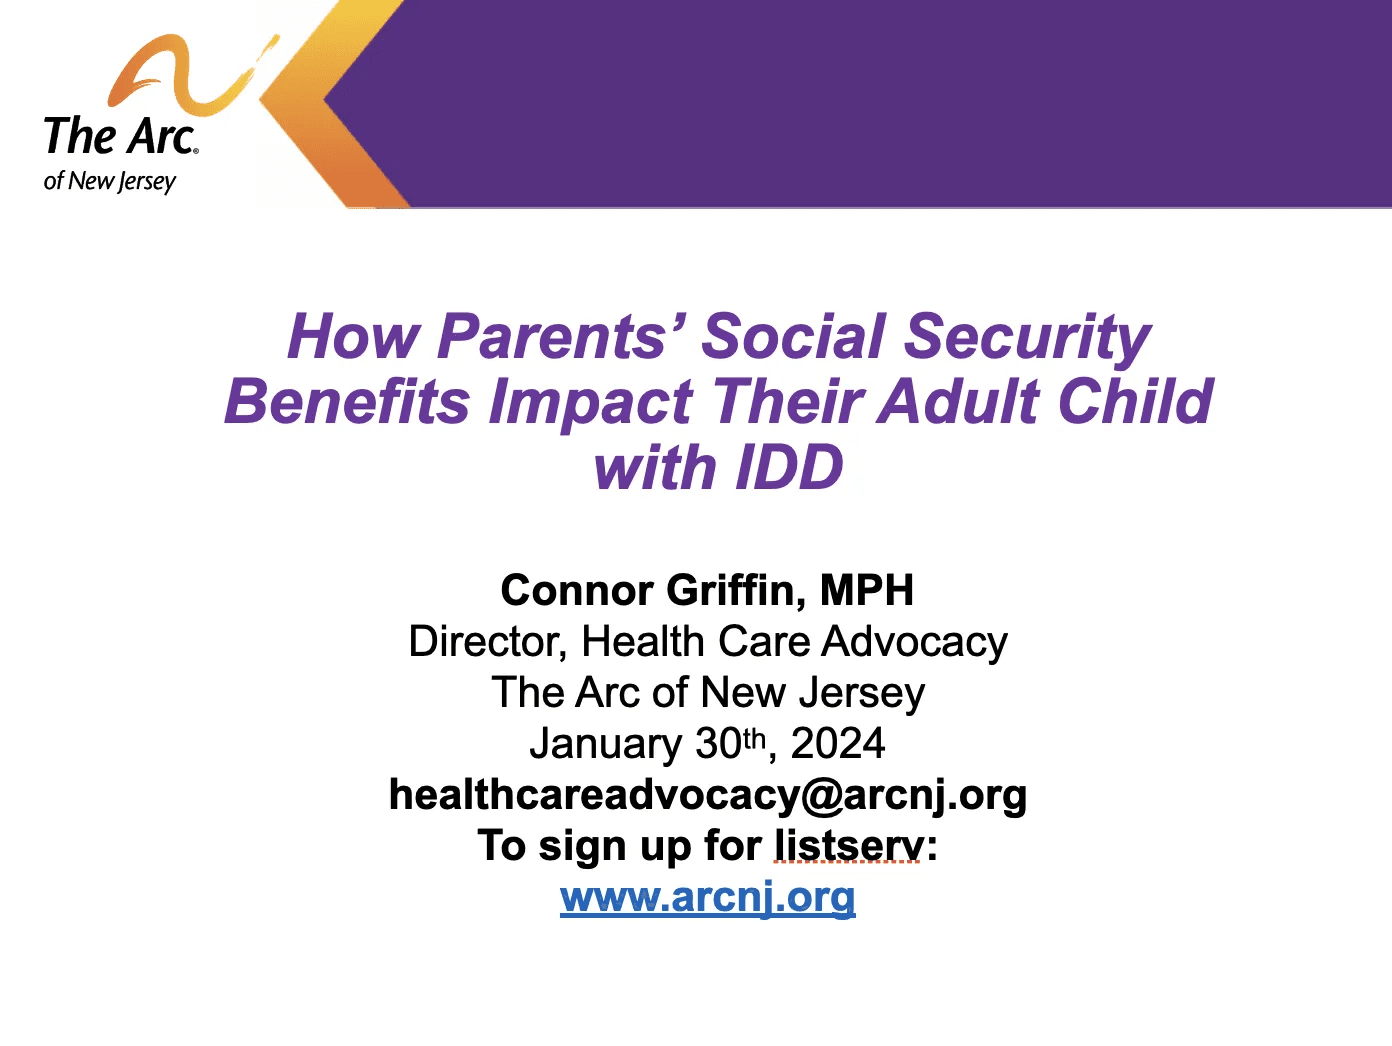 Latest Webinar: 1/30/24 How Parents’ Social Security Benefits Impact Their Adult Child with IDD